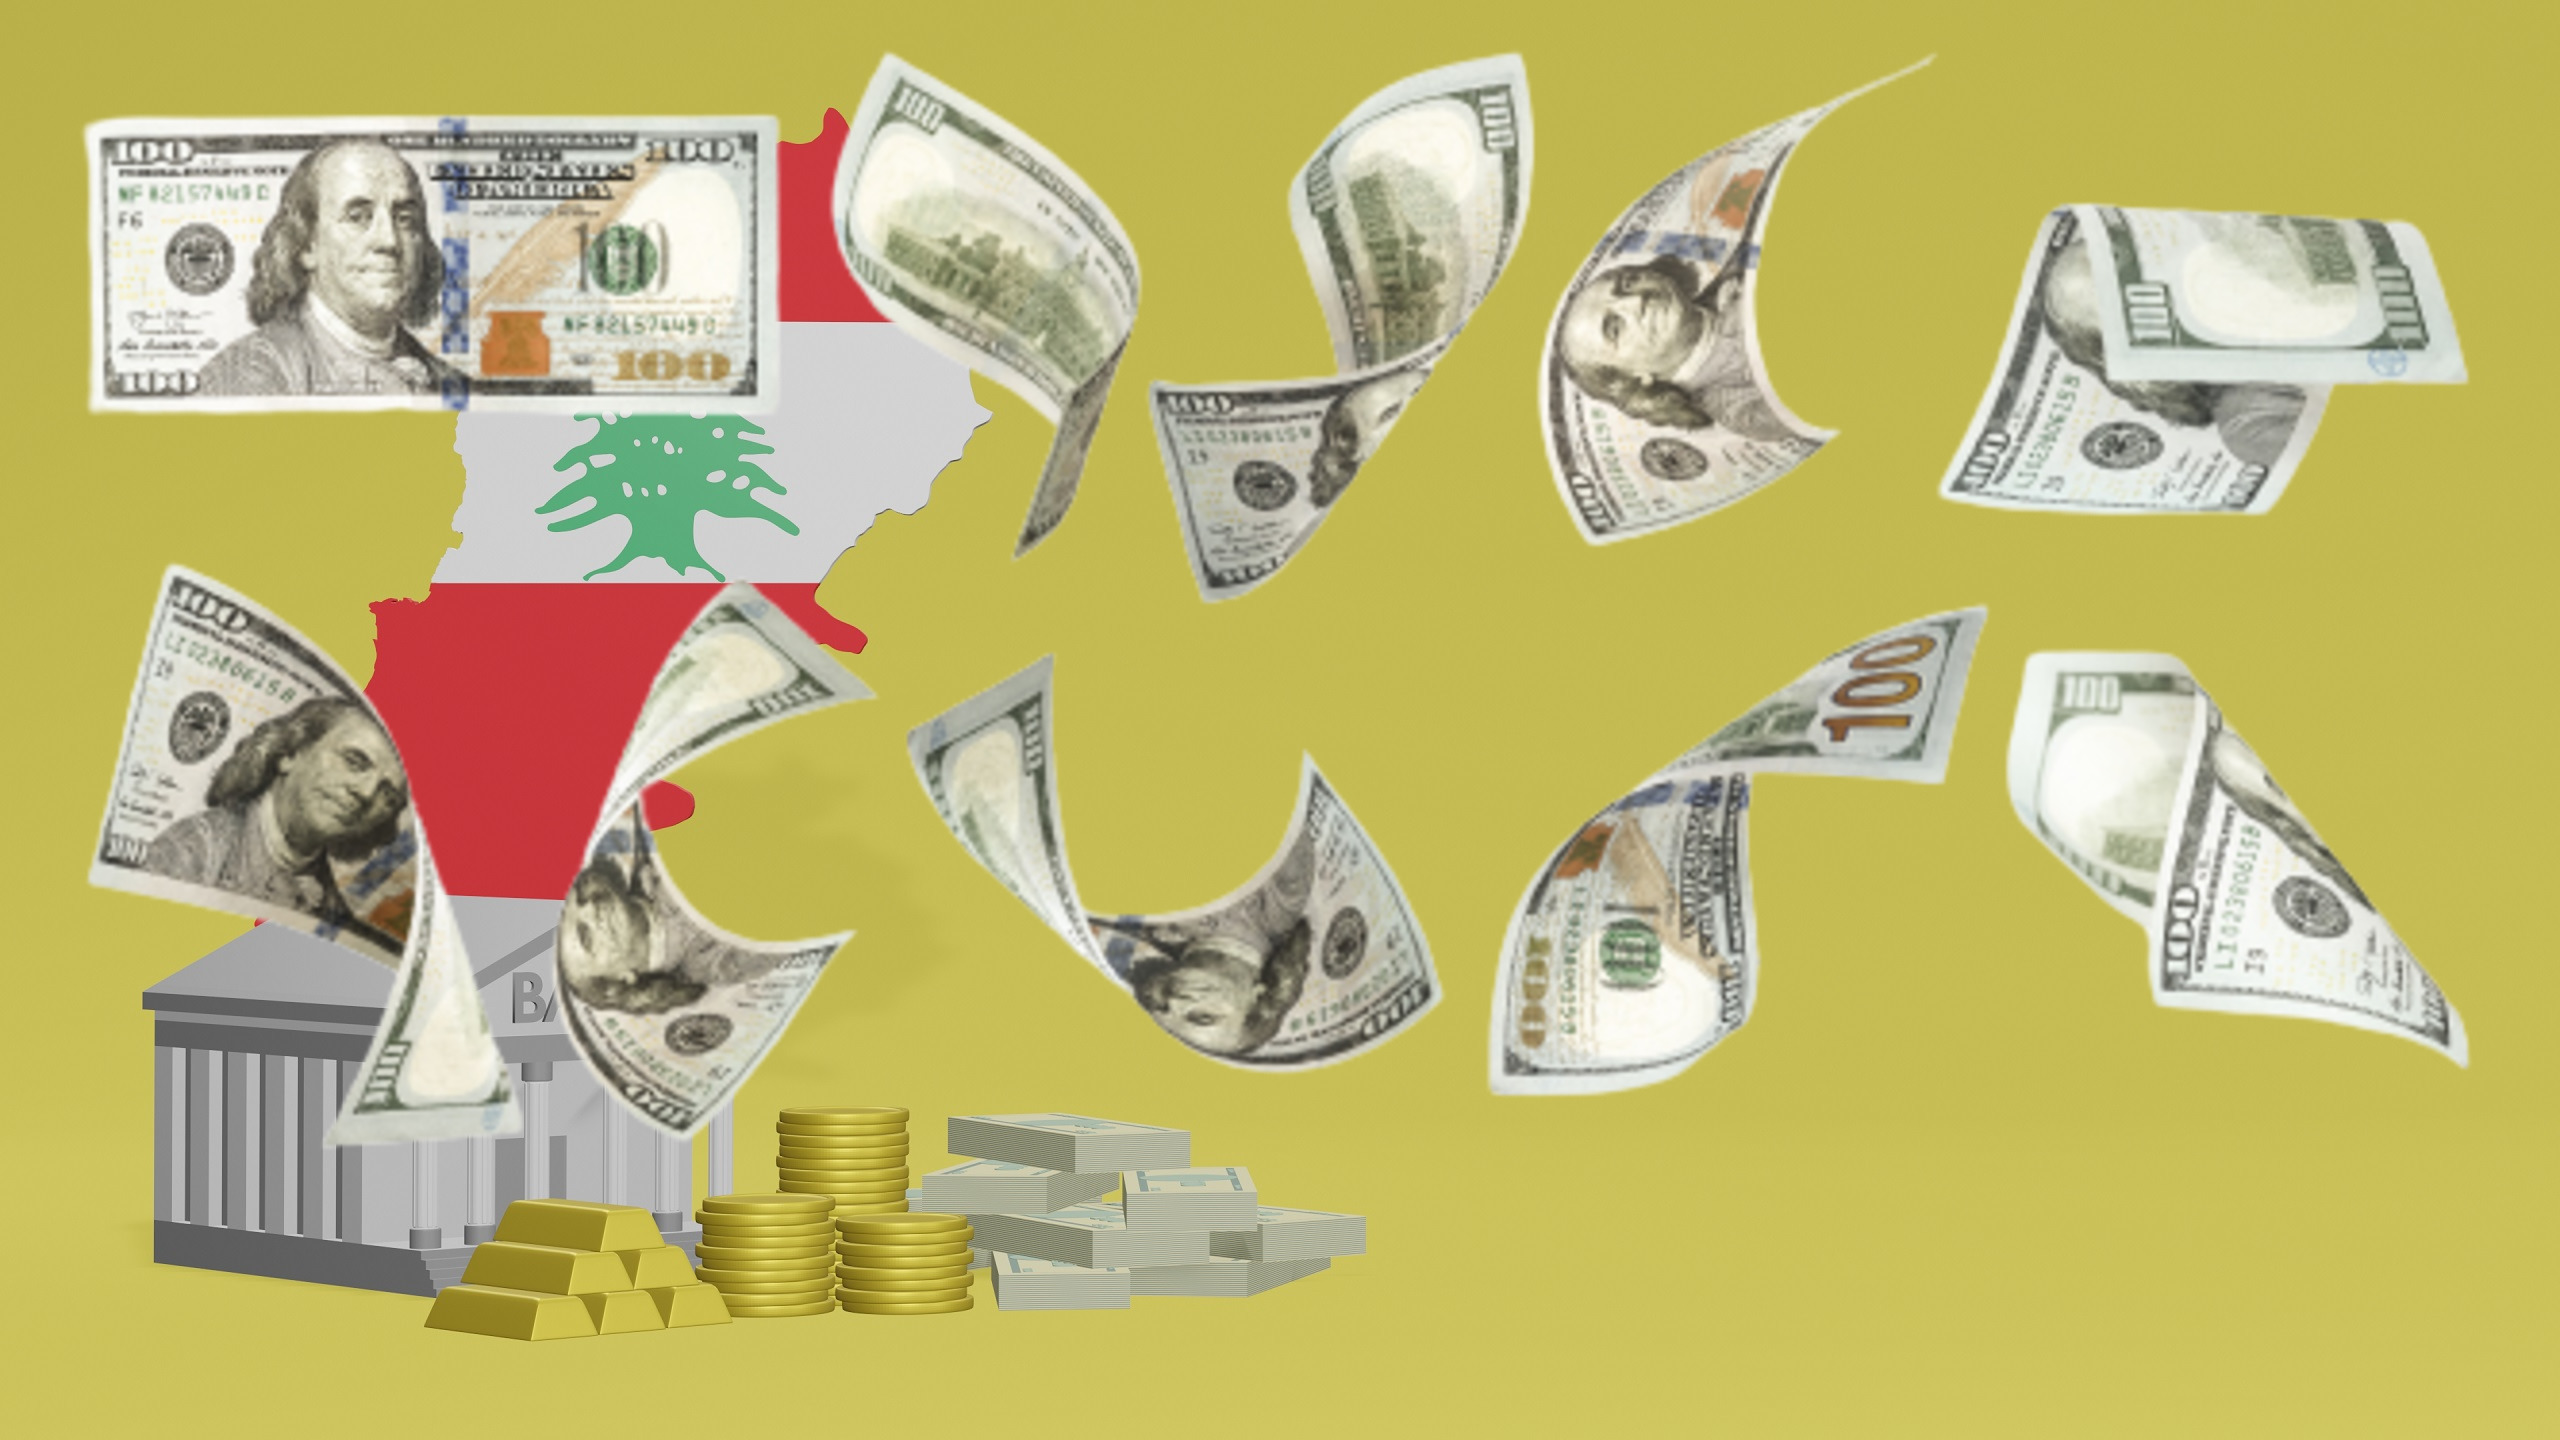 What’s the Story of the Syrian Deposits in Lebanon?